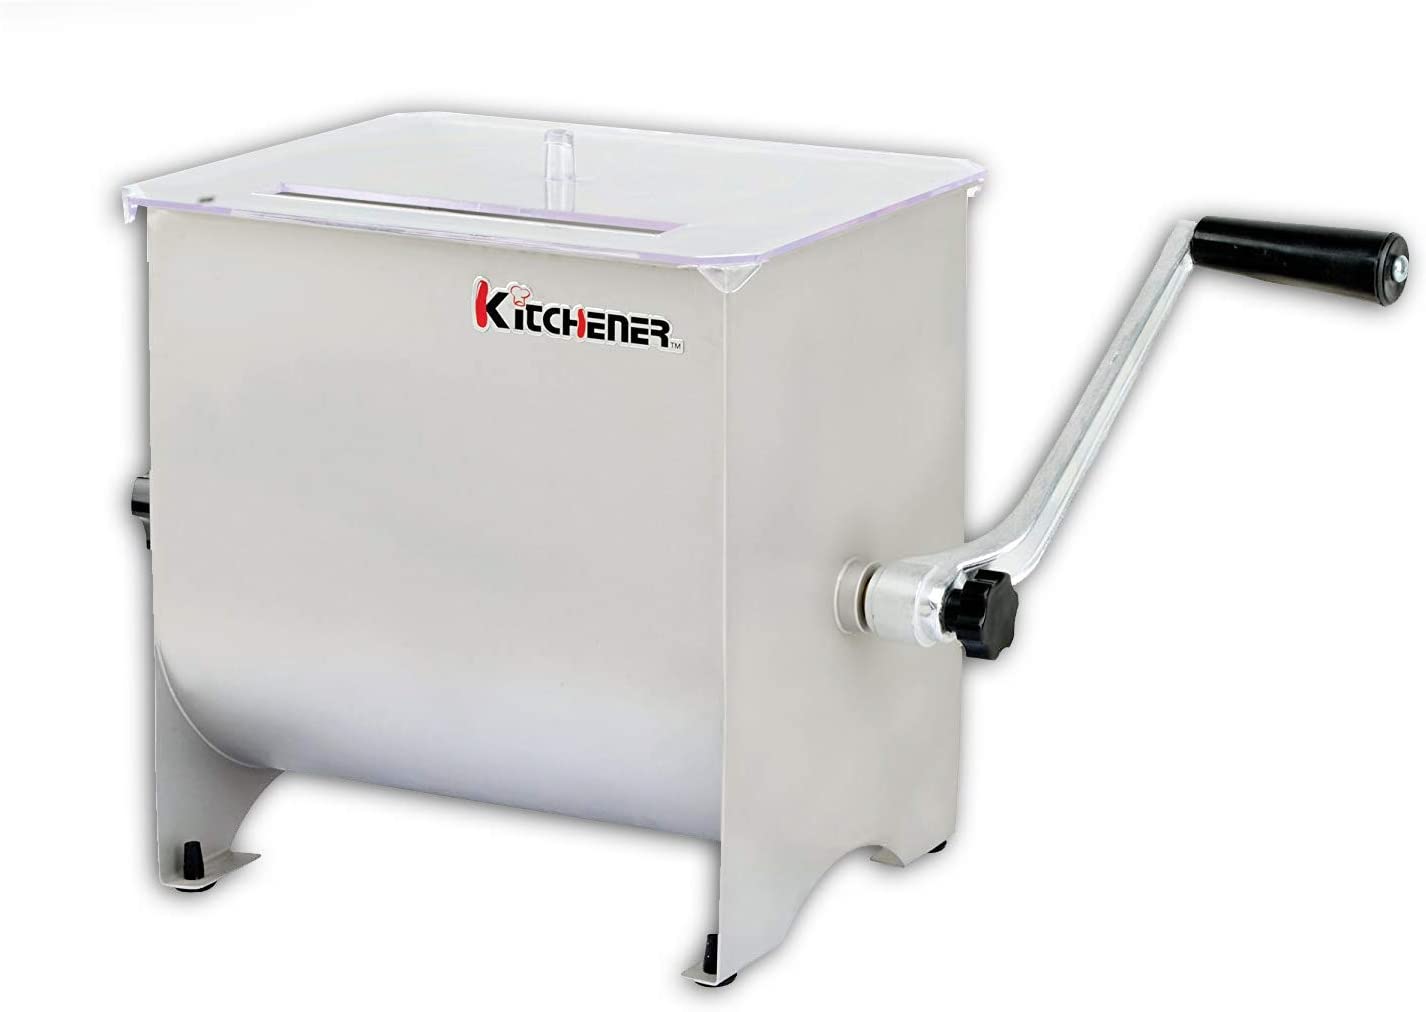 Kitchener Meat Mixer Stainless Steel Manual Hand Crank 4.2 Gallon/16L Max 17.6LBS Pound Capacity Heavy Duty Commercial Food Grade w/ 4 Removable Mixing Paddles and Clear Lid for Seasoning Meat